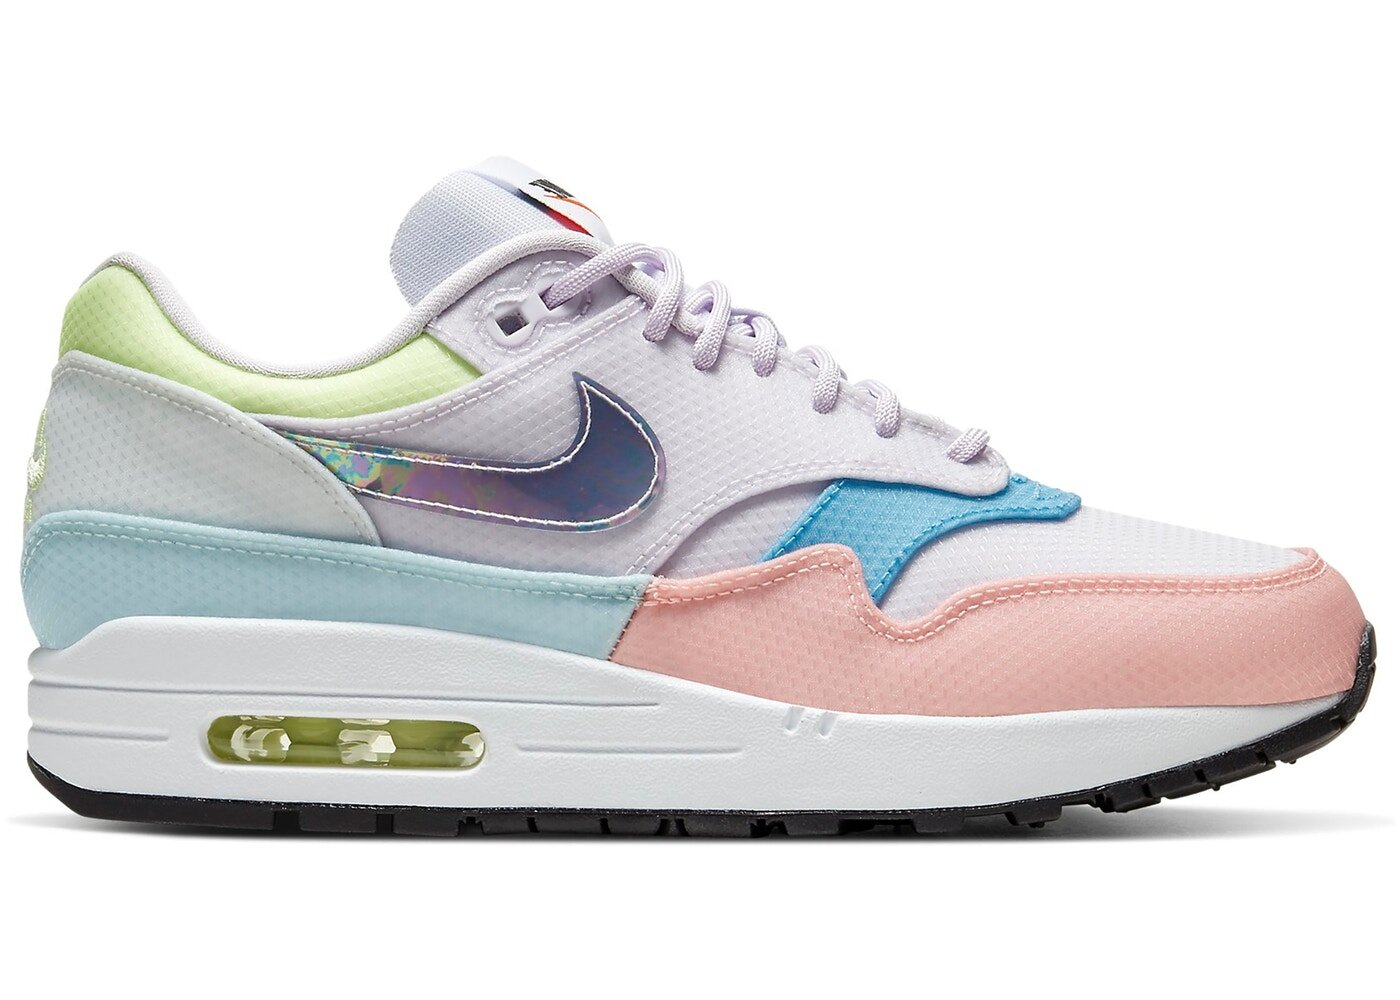 Now Available: Nike Air Max 1 (W) 